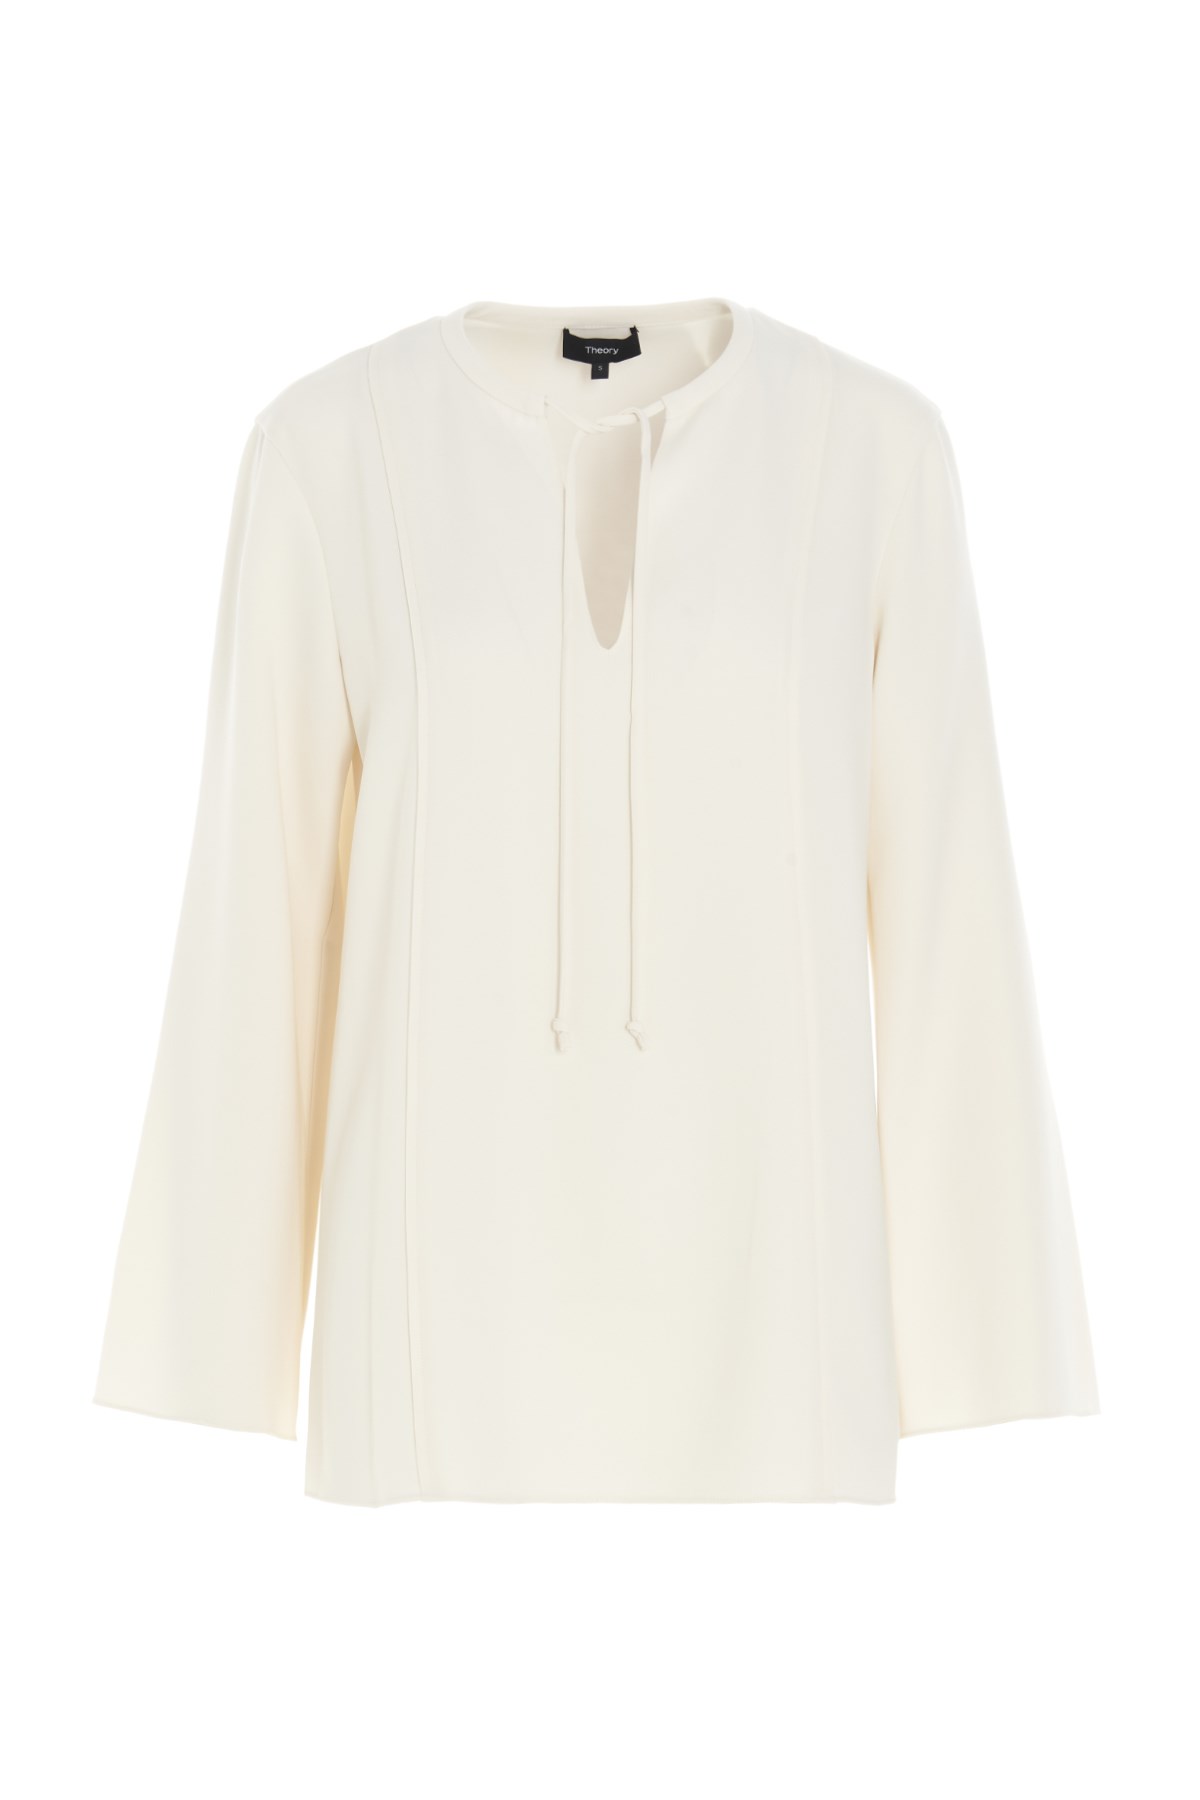 THEORY Blouse With Lace Around The Collar